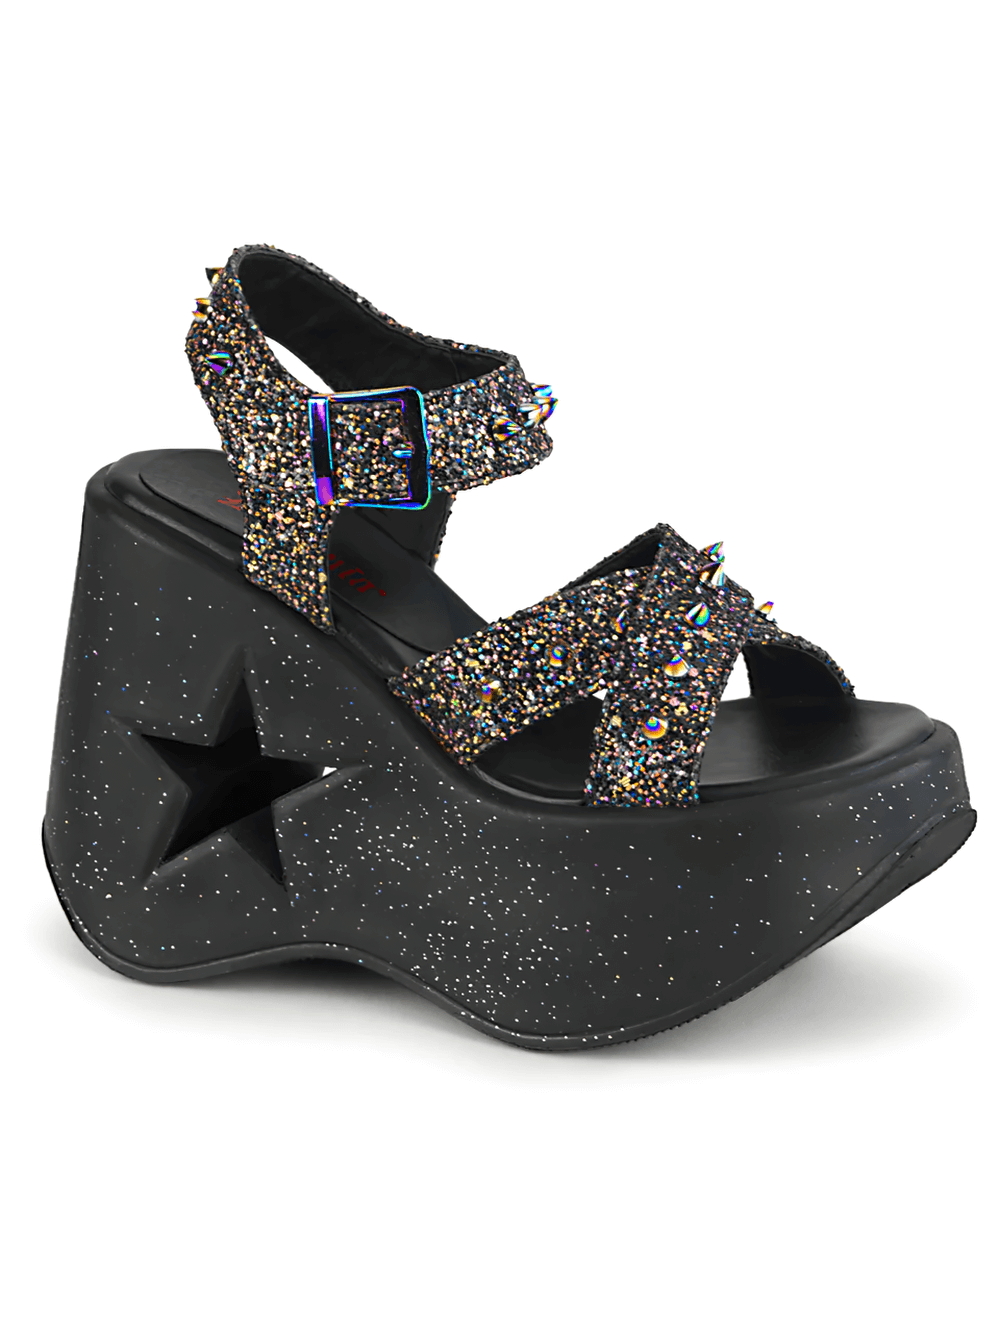 DEMONIA Star Cutout Glitter Wedge Sandals with Spikes